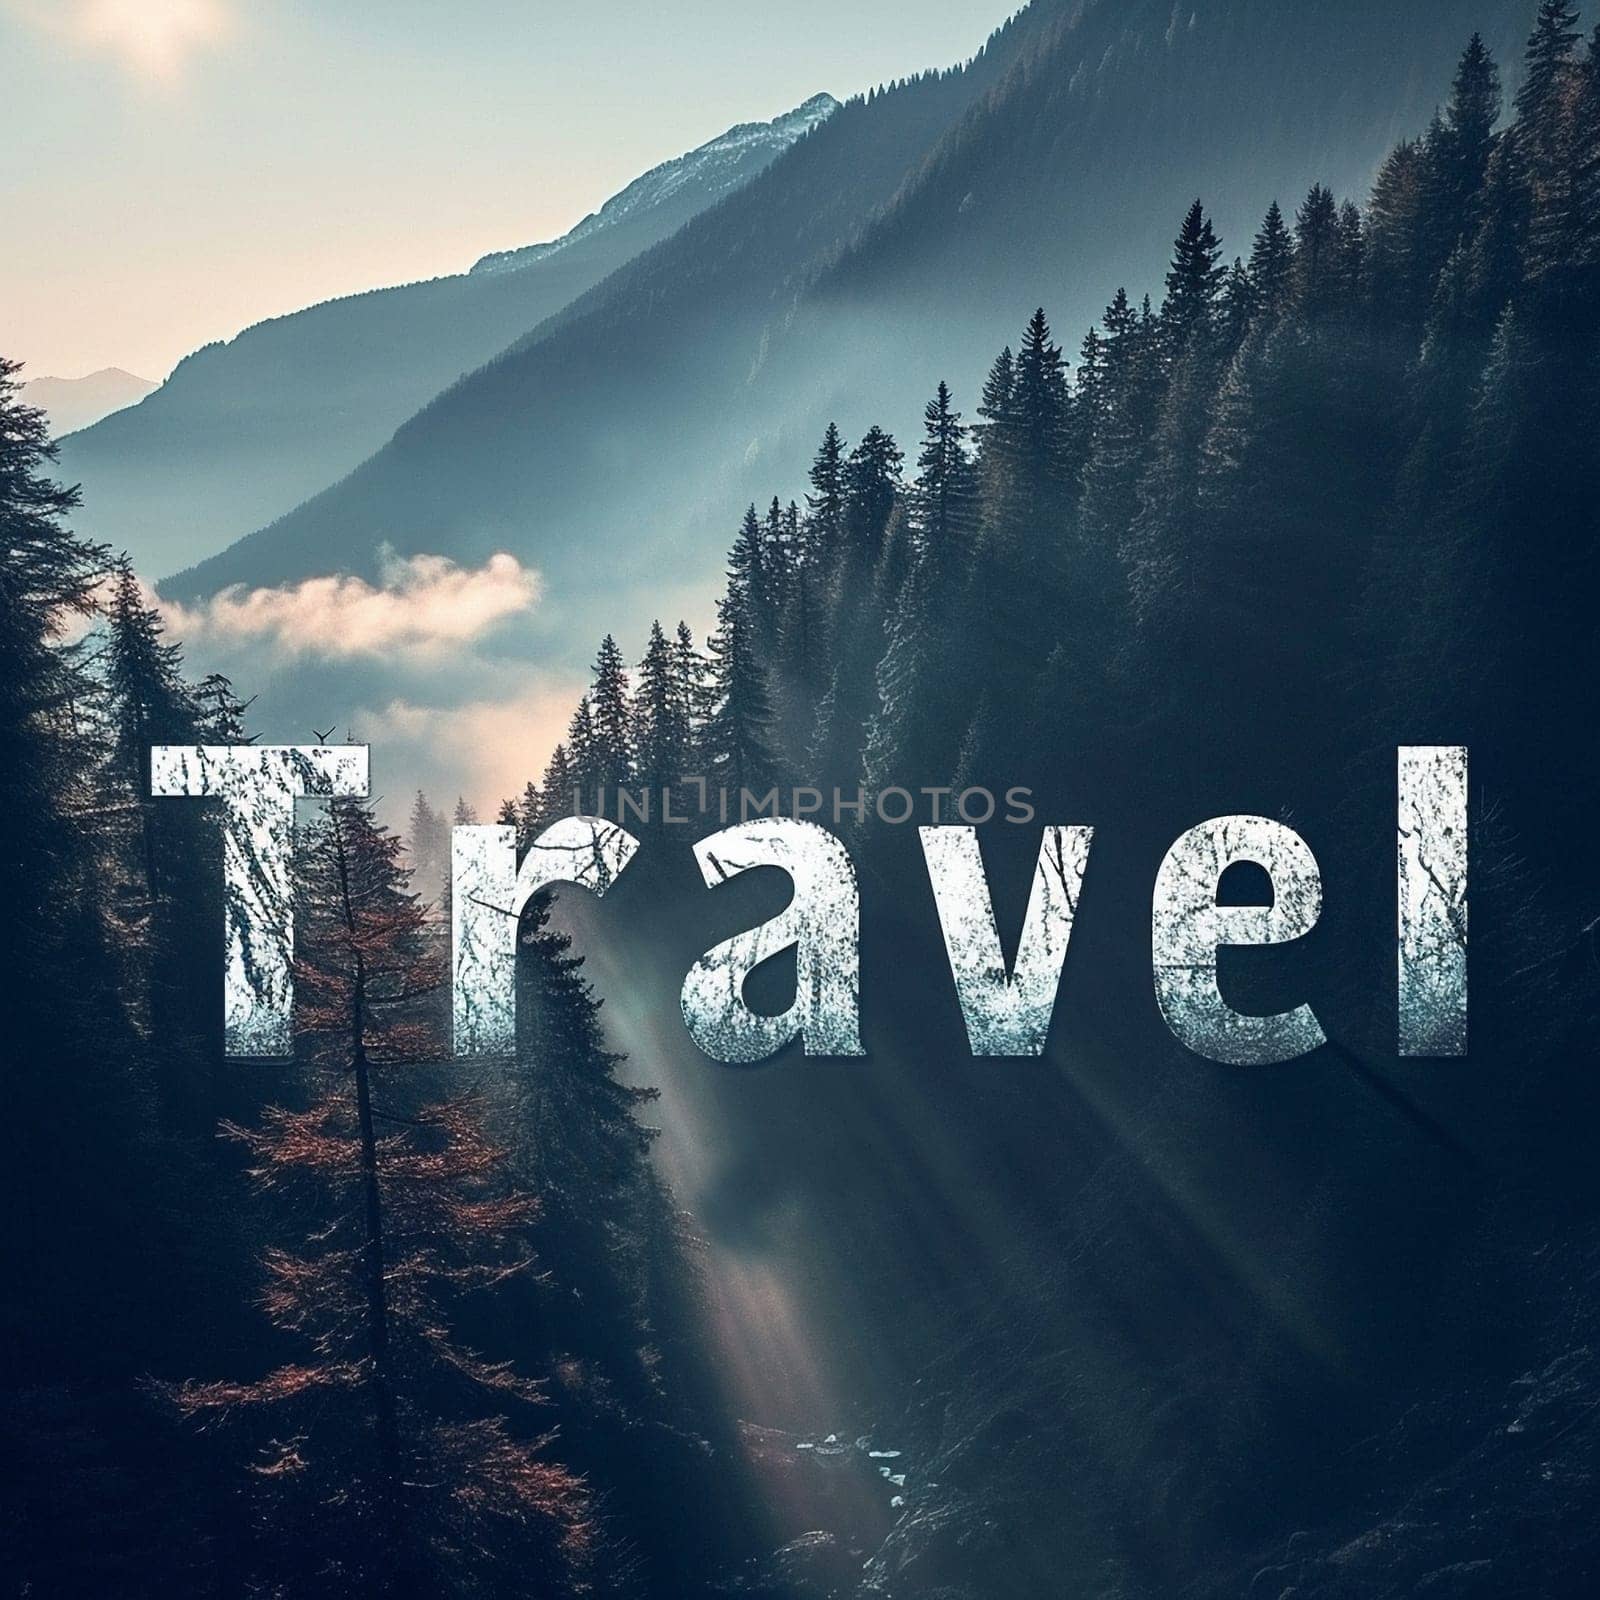 A beautiful travel logo with a forest. High quality illustration